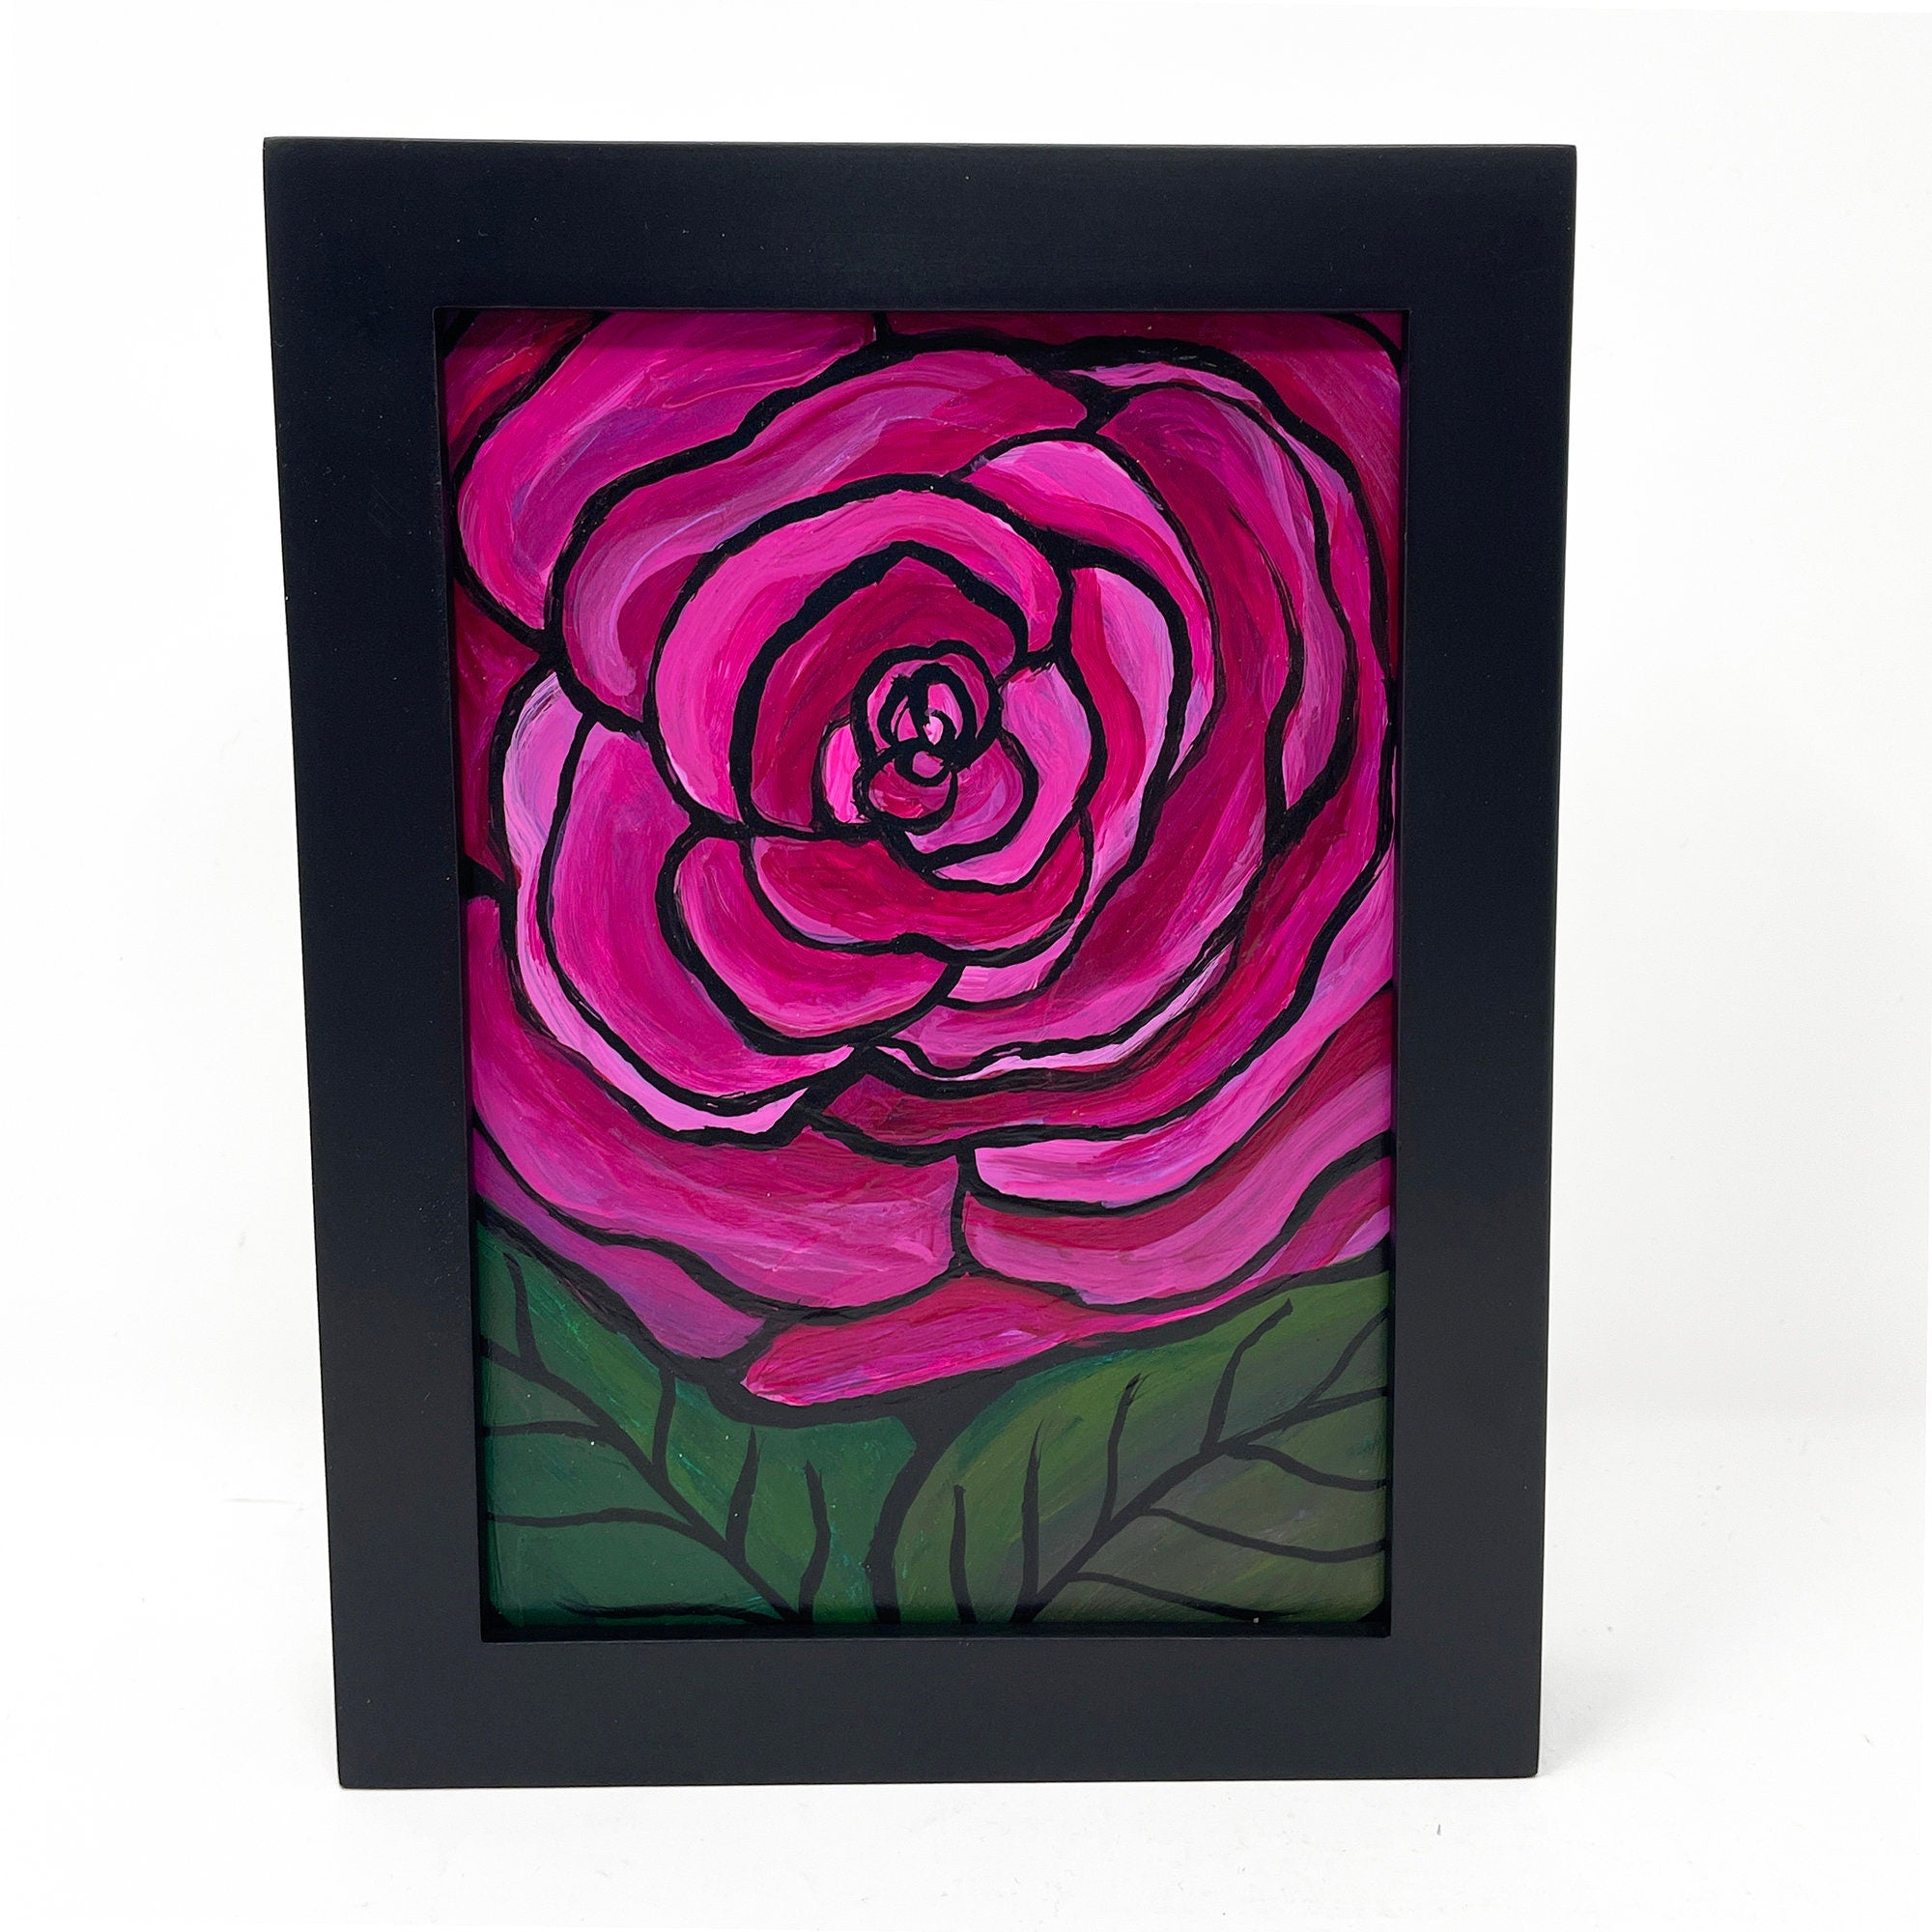 Blooming Ranunculus Painting - Framed Flower Art - 5 x 7 inches - Magenta Pink and Green